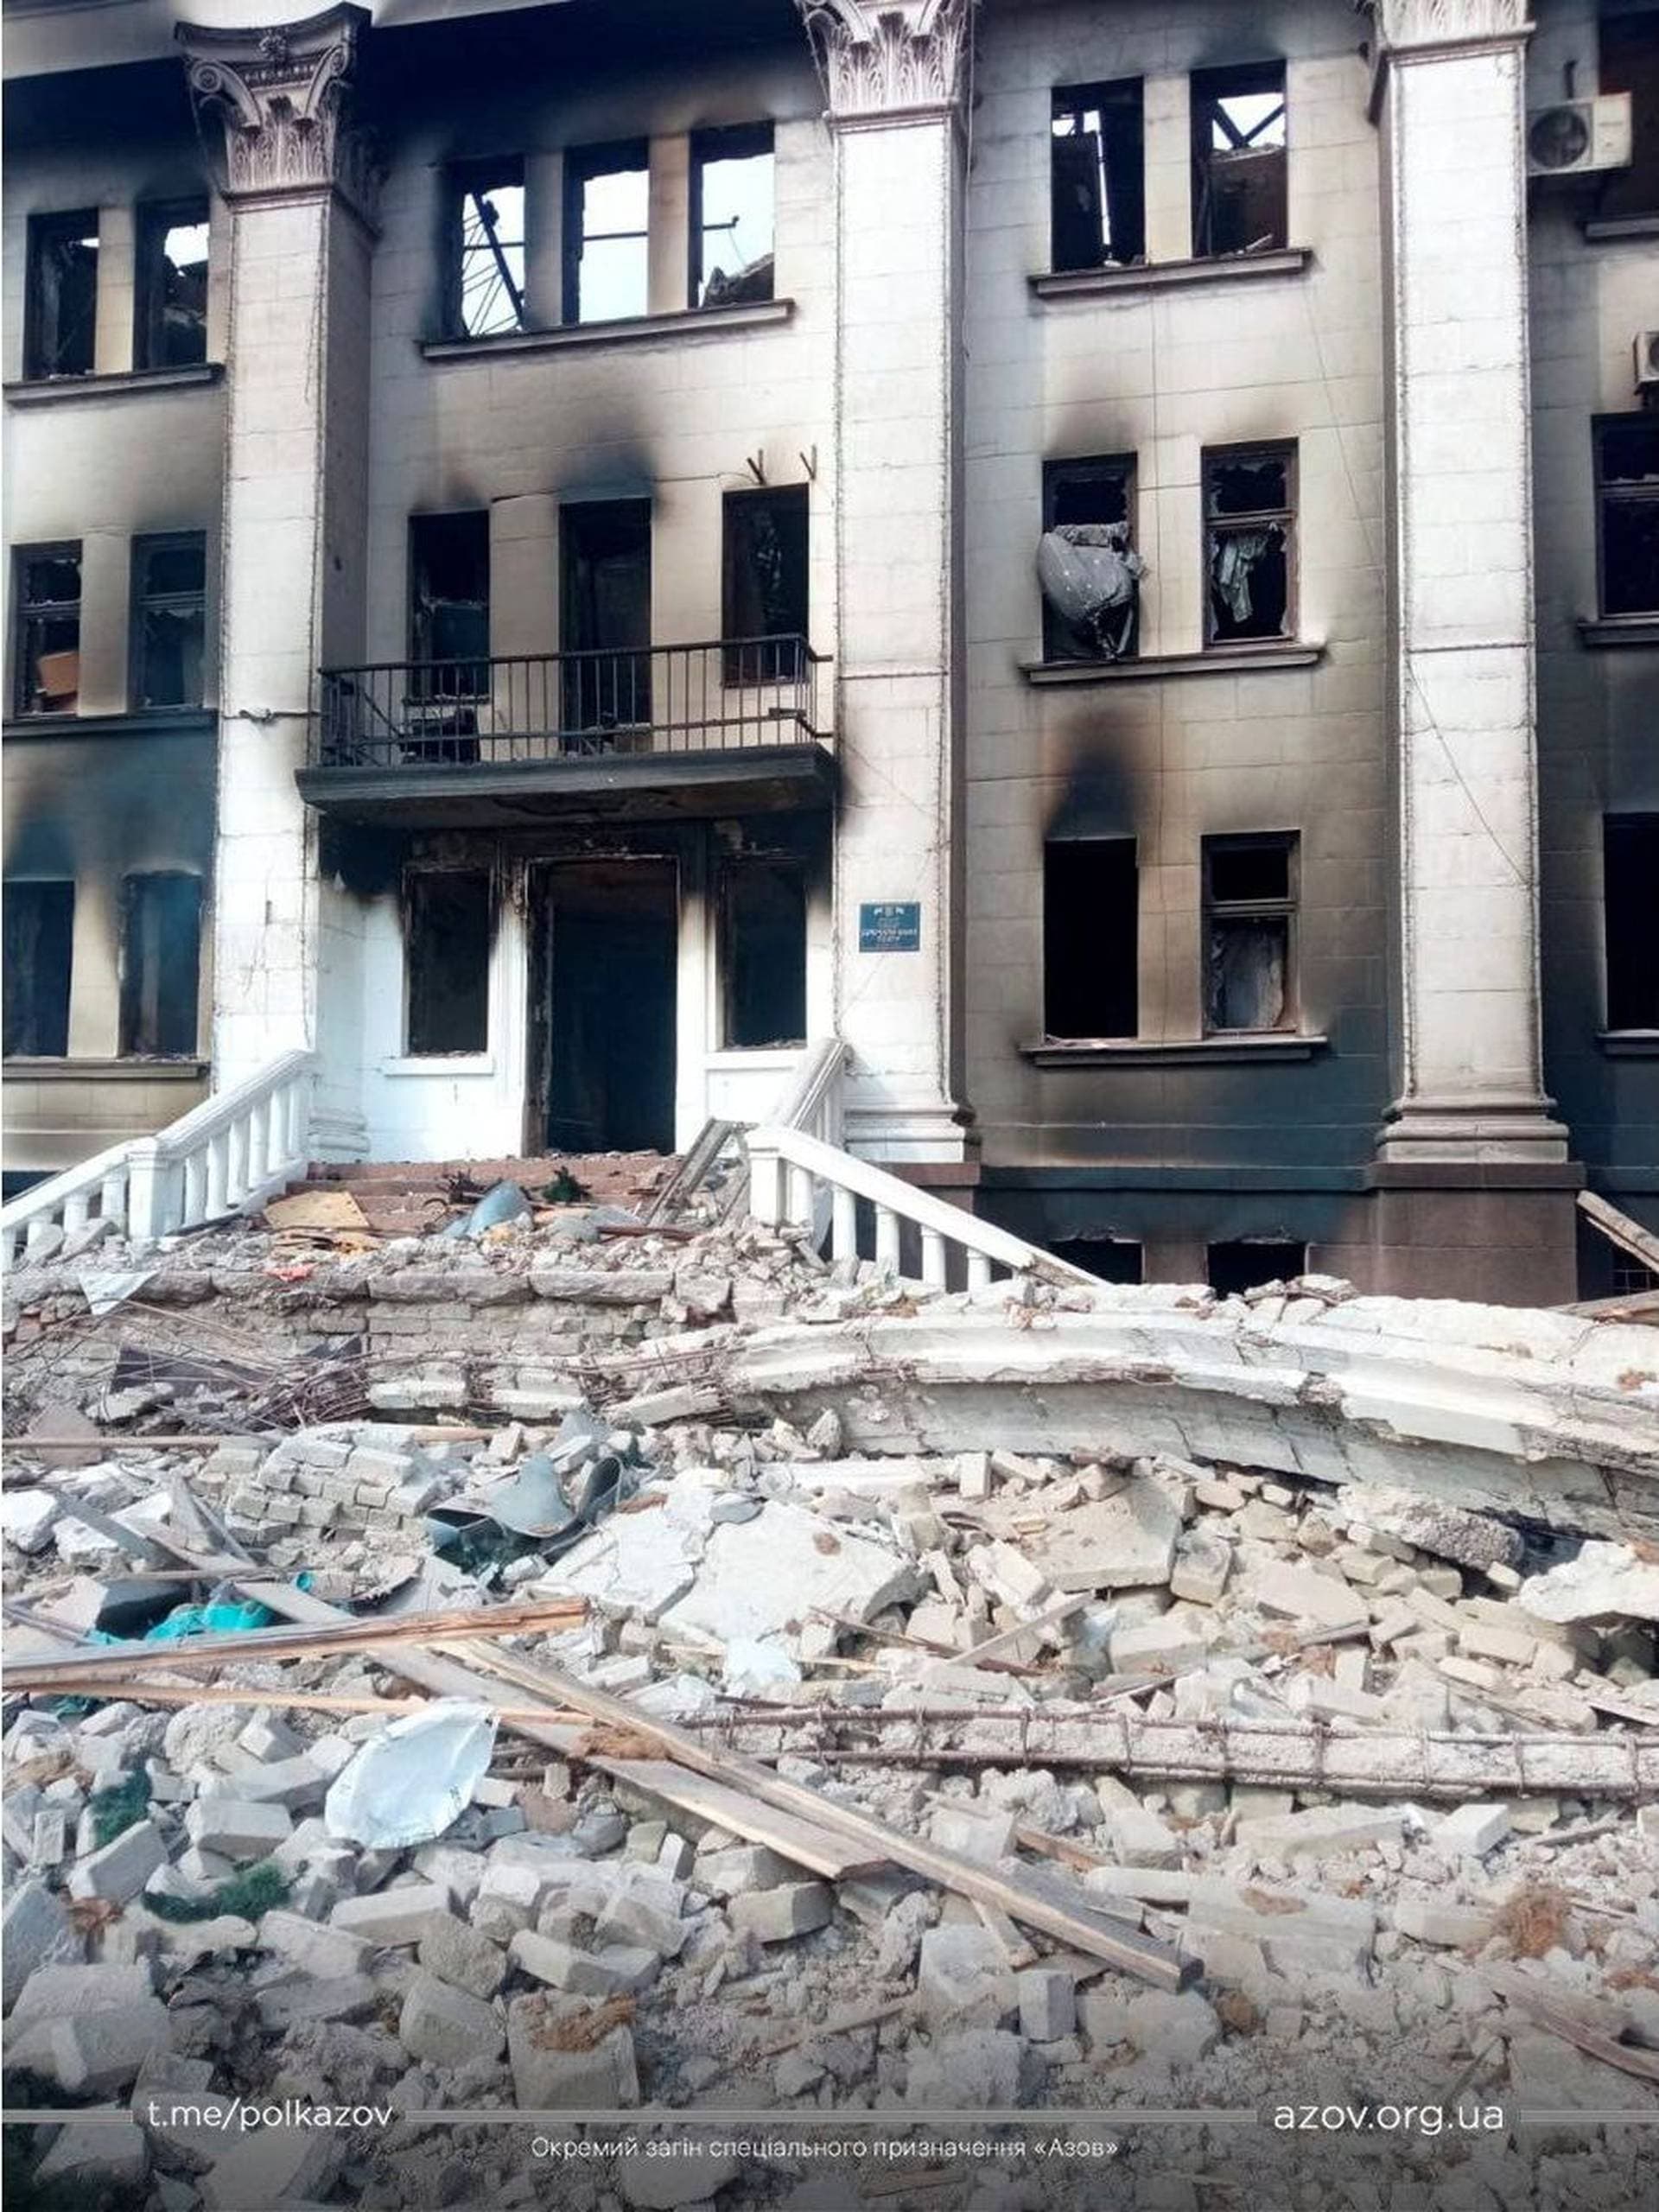 Hundreds of people were sheltering in a Mariupol drama theatre when it was hit in a Russian air attack